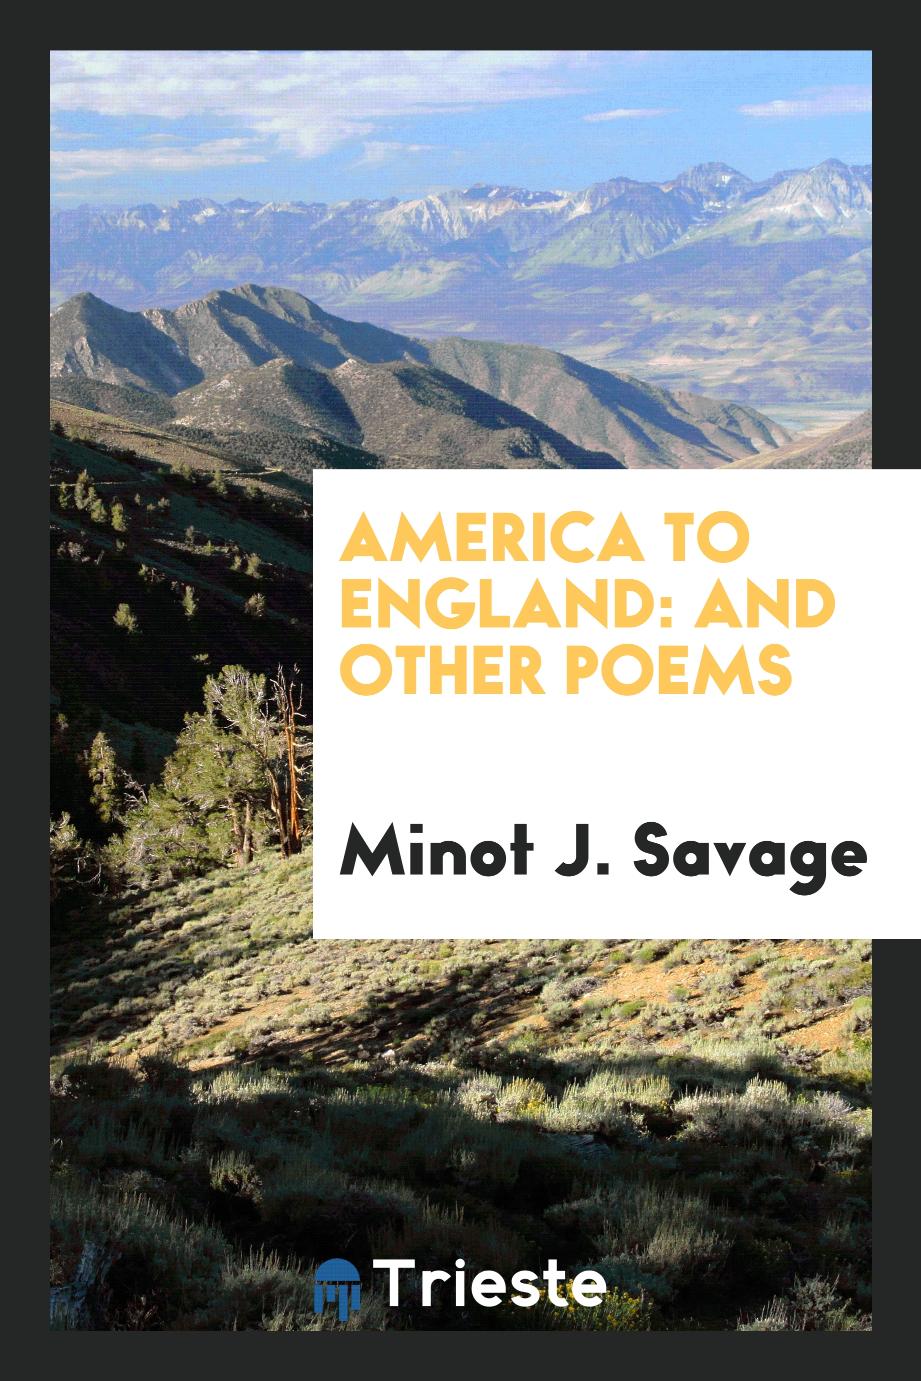 America to England: And Other Poems